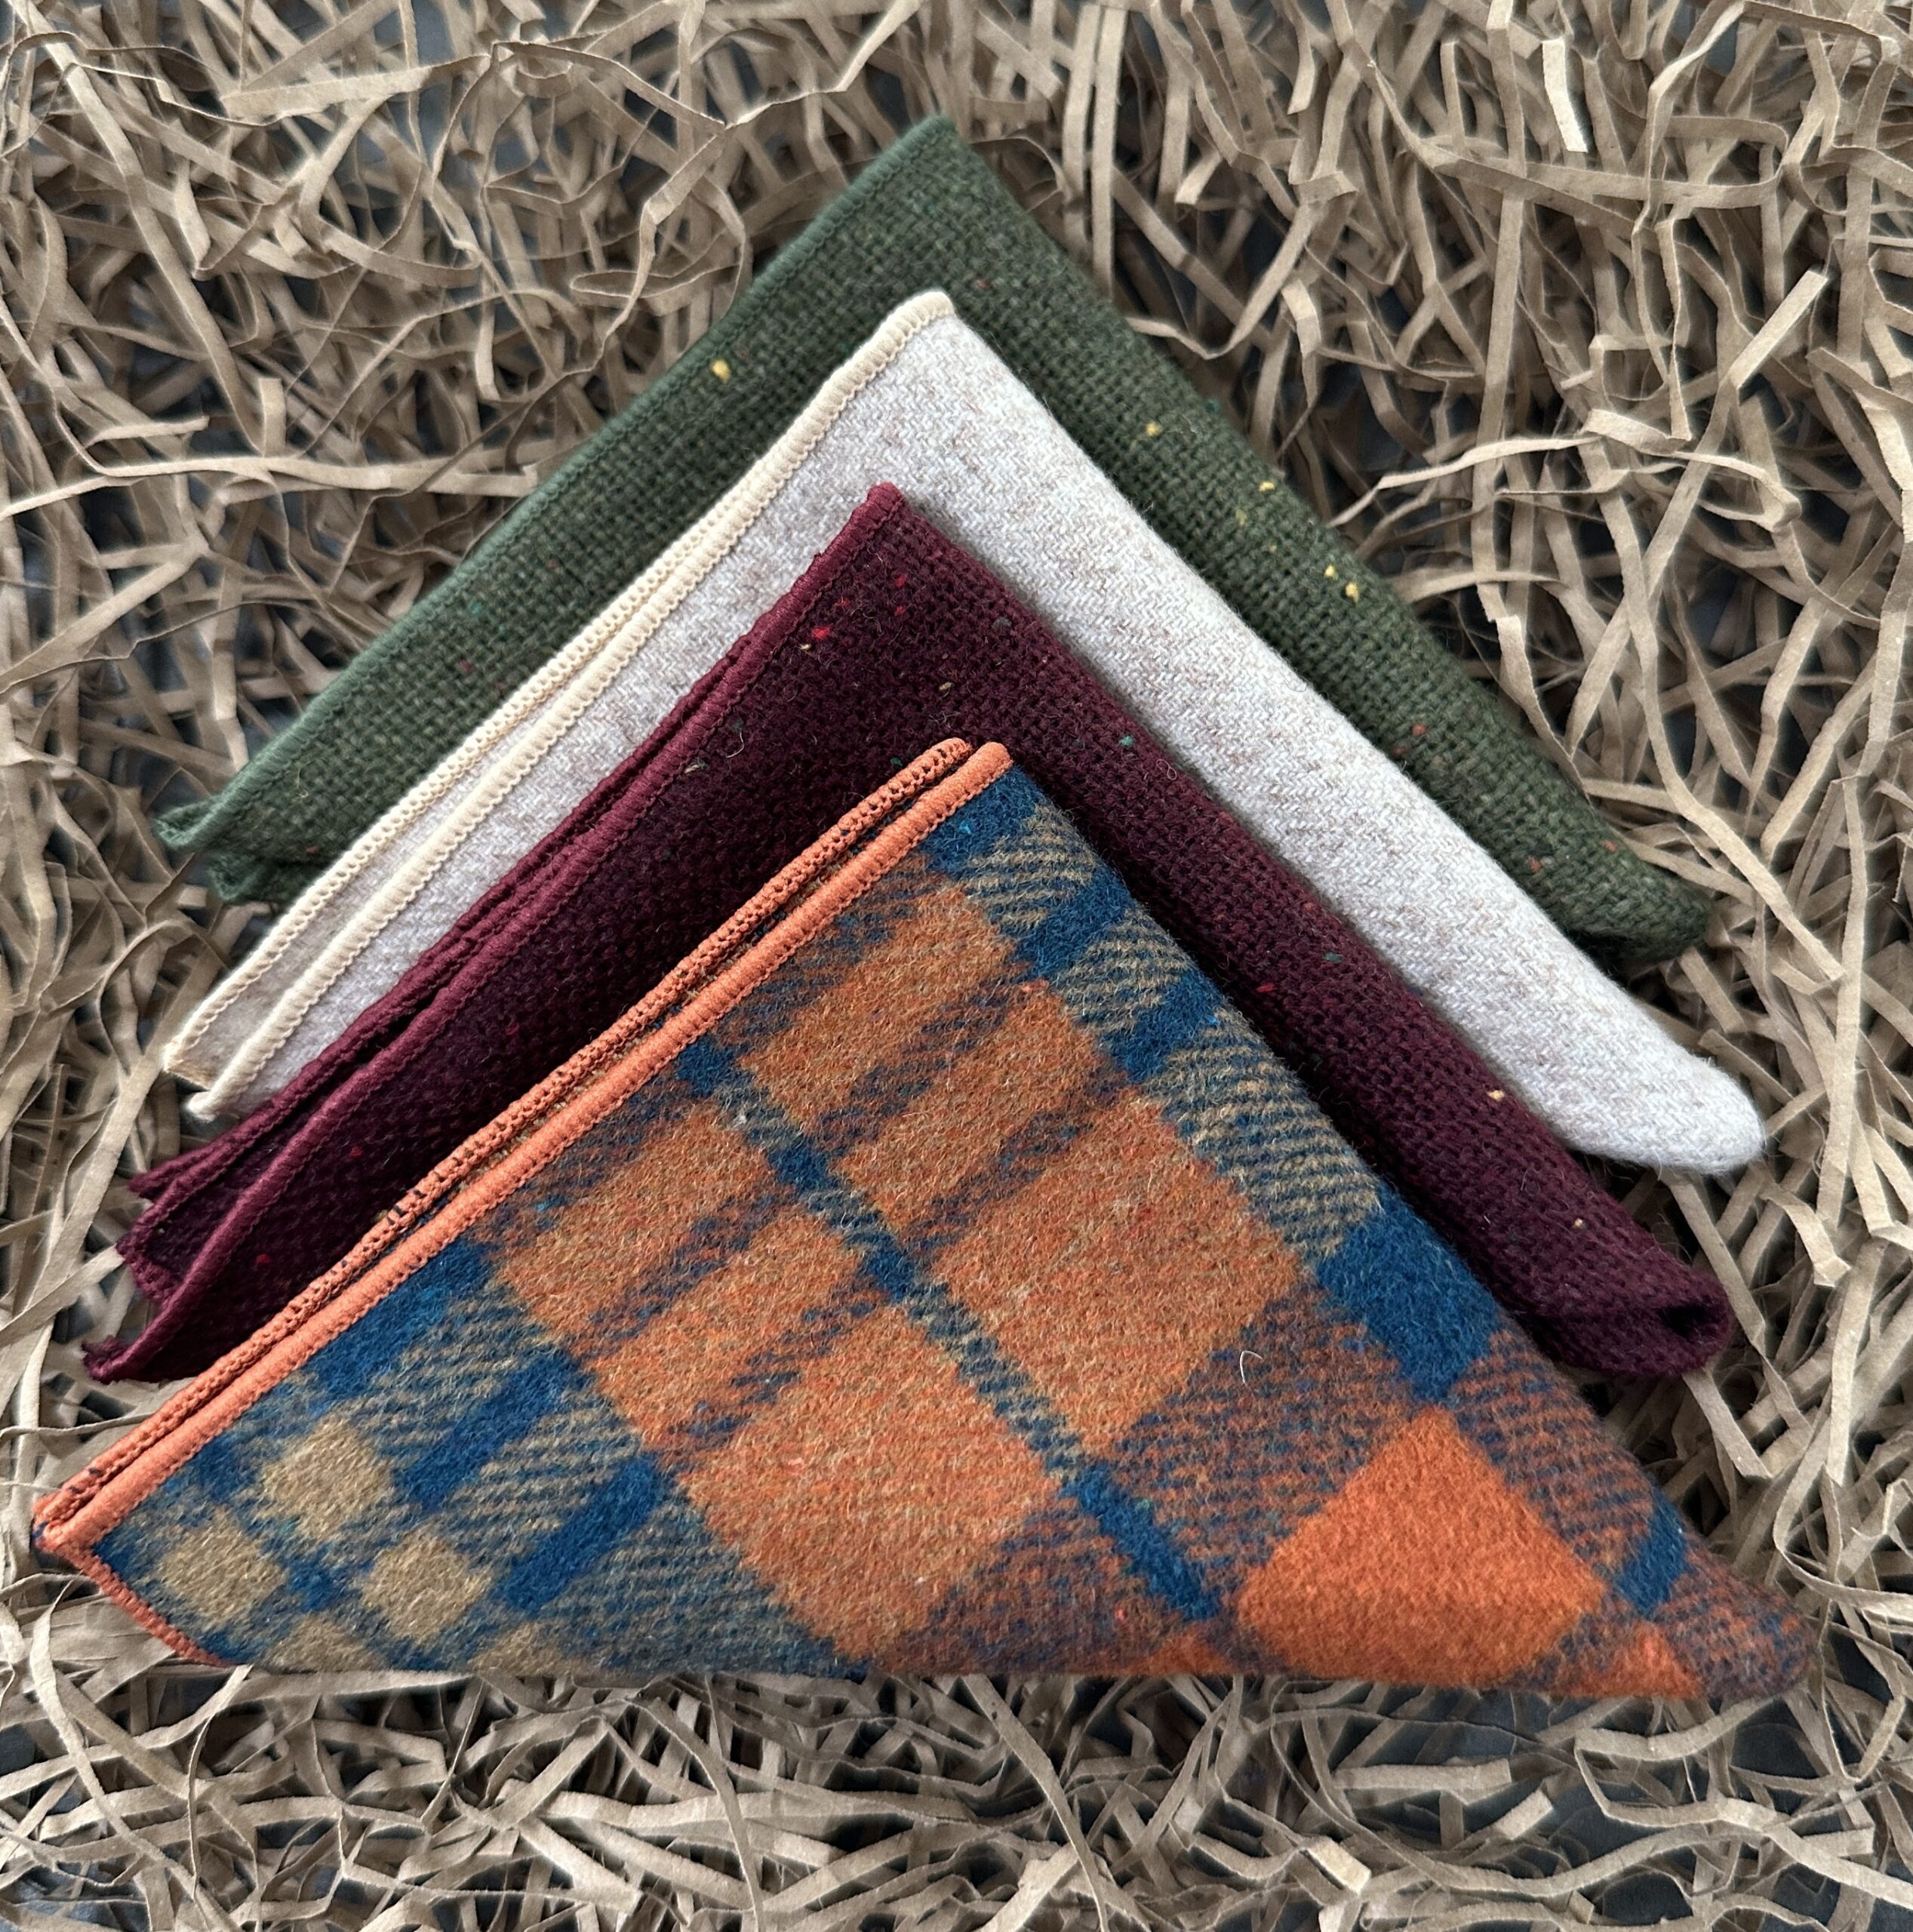 A set of three wool pocket squares for men in red, green and cream wool.